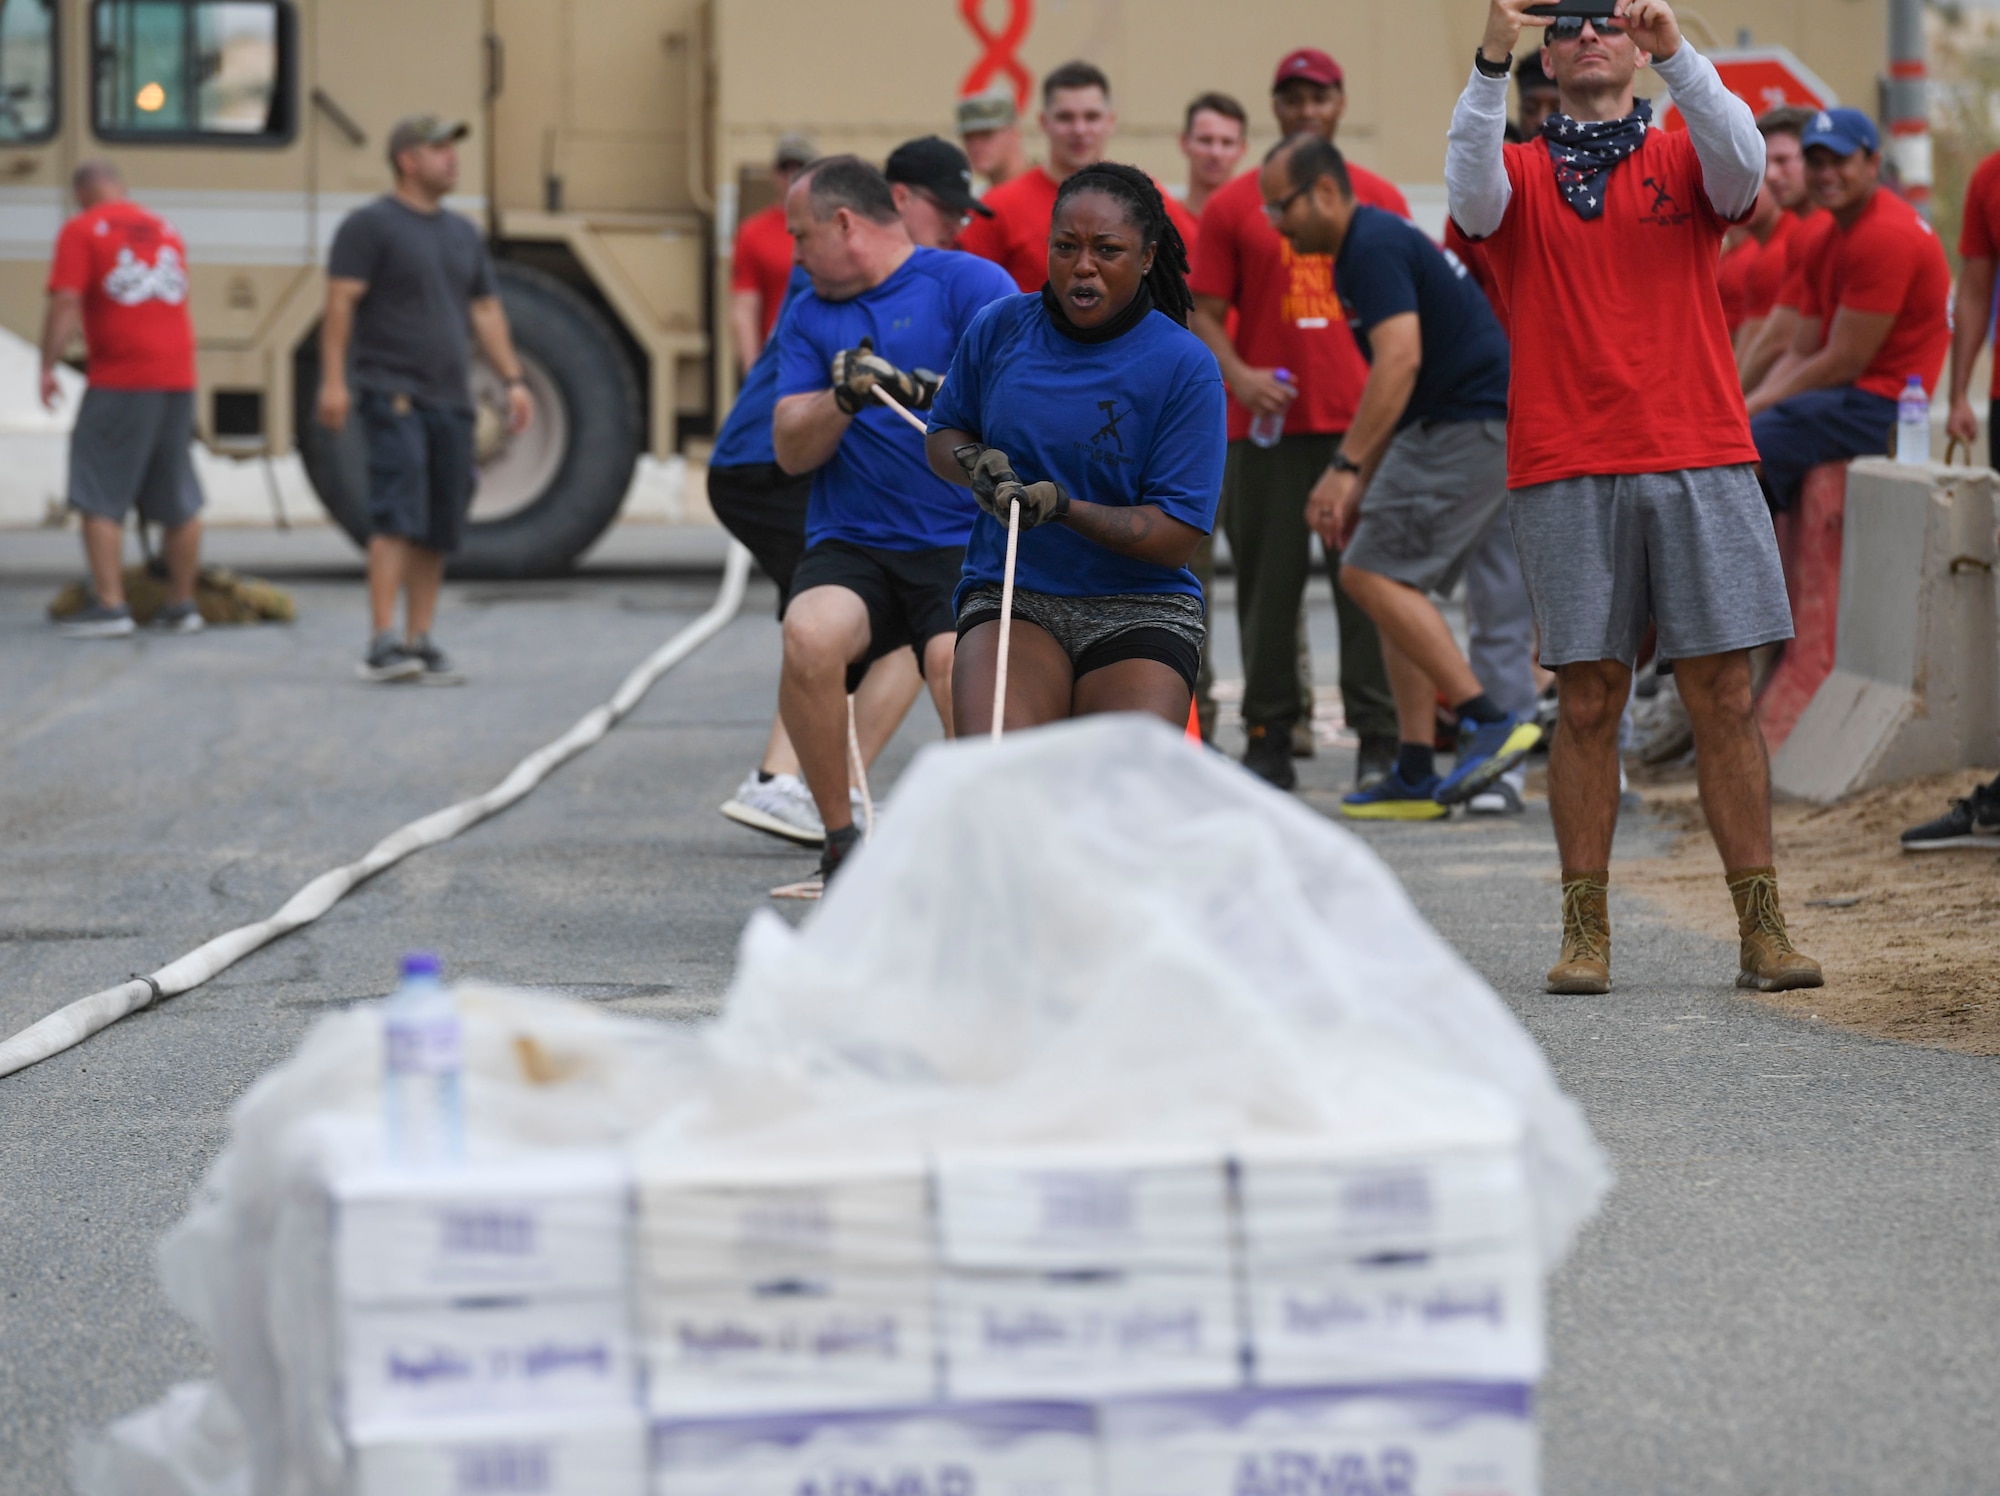 U.S. Air Force Airmen assigned to the 407th Expeditionary Security Forces Squadron pull a pallet of water during the Battle of the Badges event at Ahmed Al Jaber Air Base, Kuwait, Nov. 11, 2020.